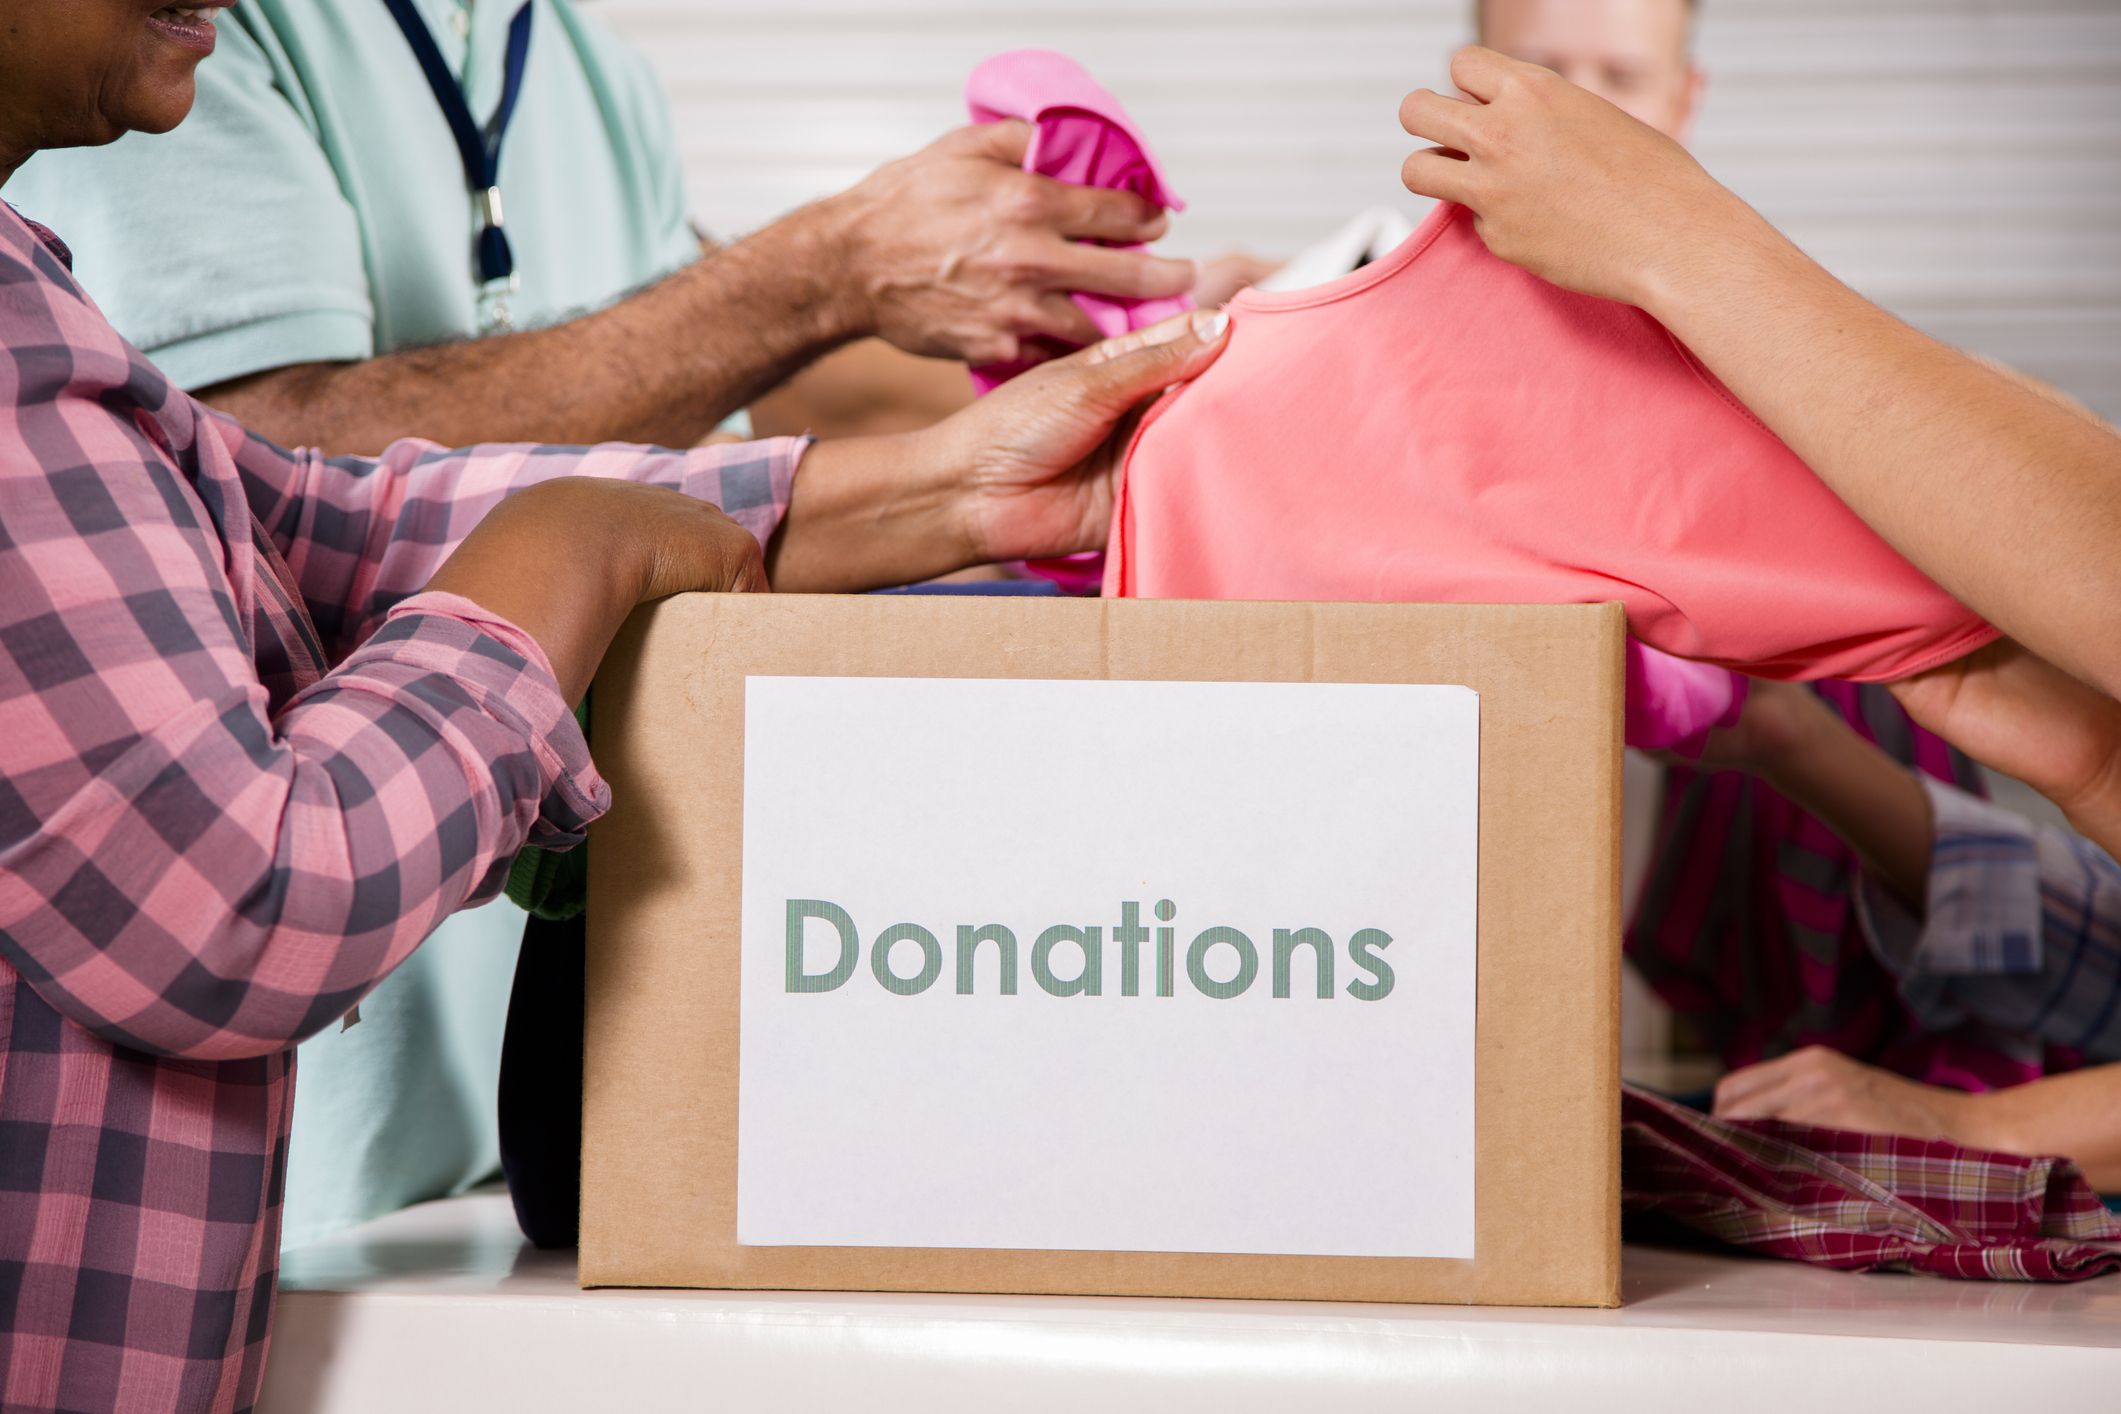 Donate Clothes Near Me: 8 Places To Donate Clothes or Sell Them for Cash